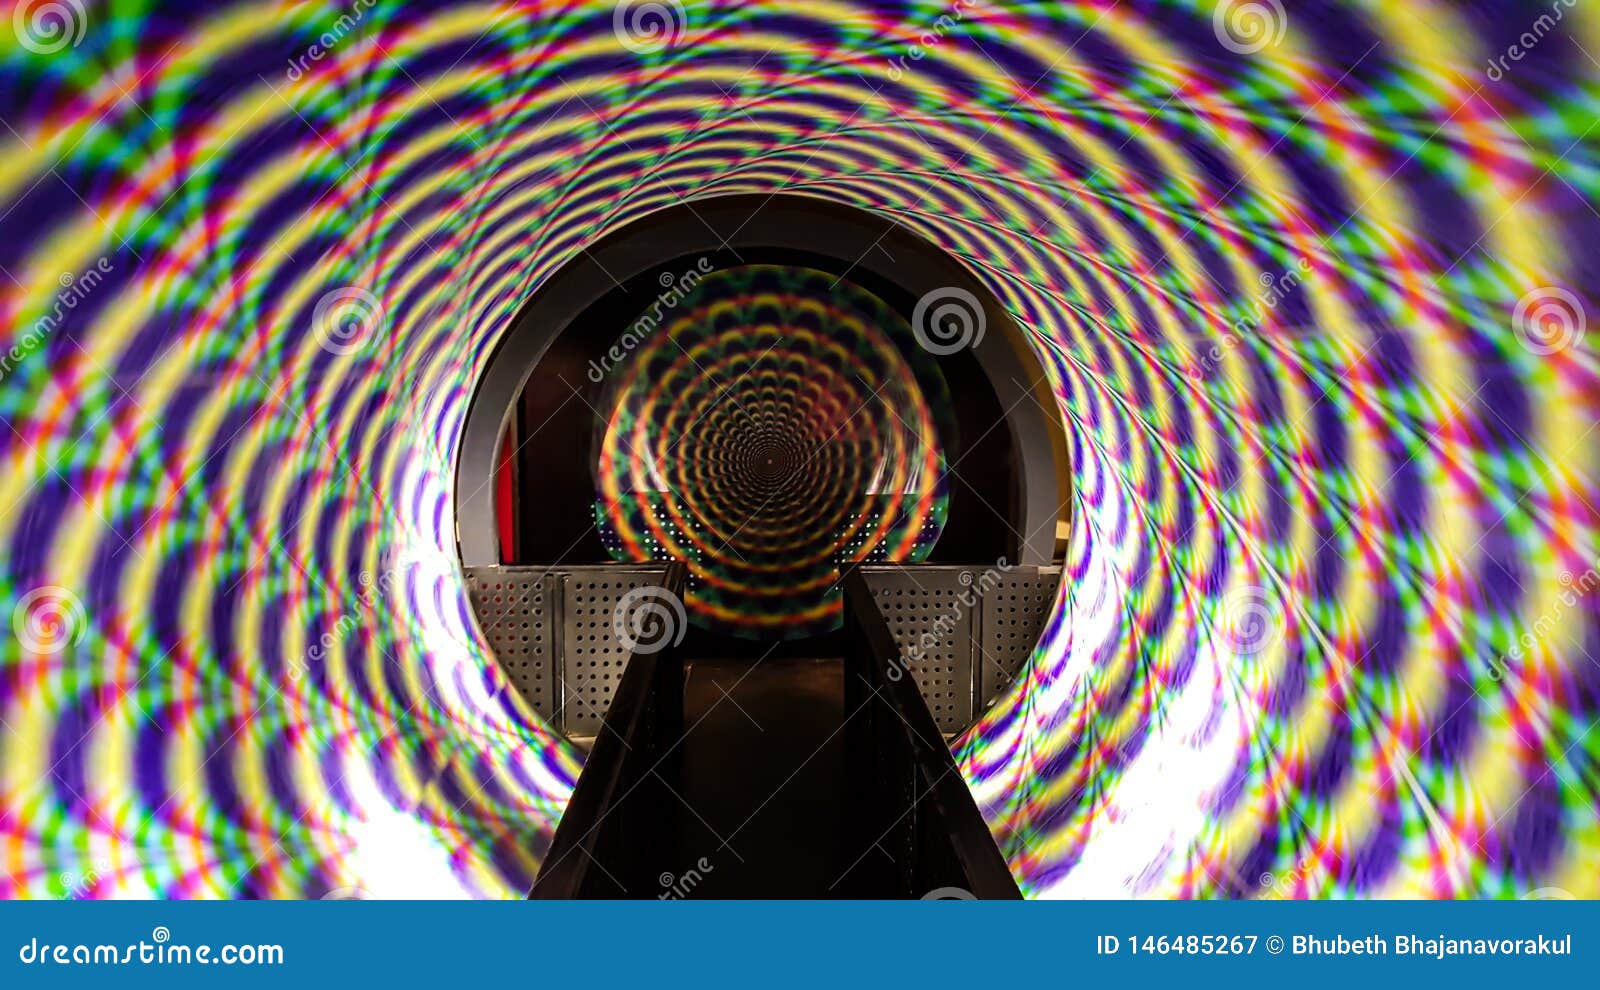 The Dizzy Tunnel is Spinning in the Hold Time Capsule or